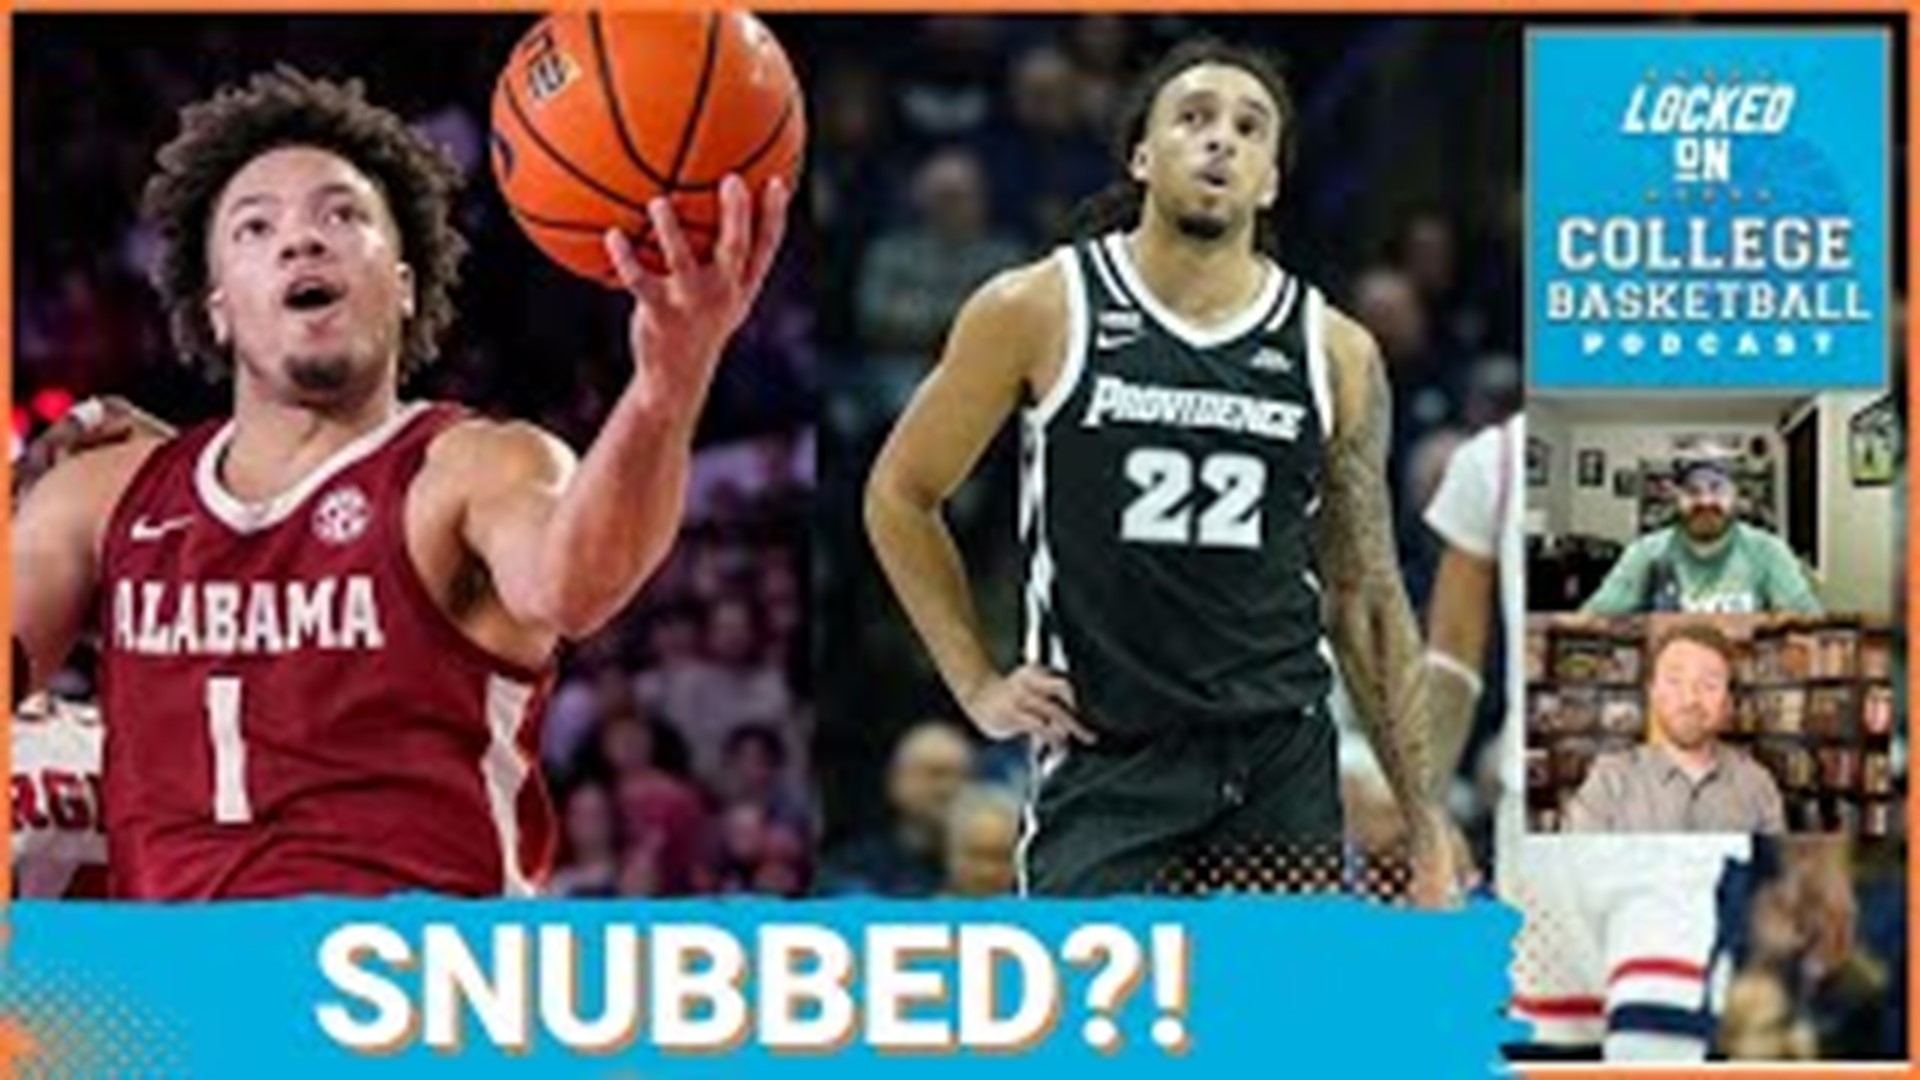 The top 10 finalists have been named for college basketball's positional awards, and while this list is fluid we already see some players who were snubbed.